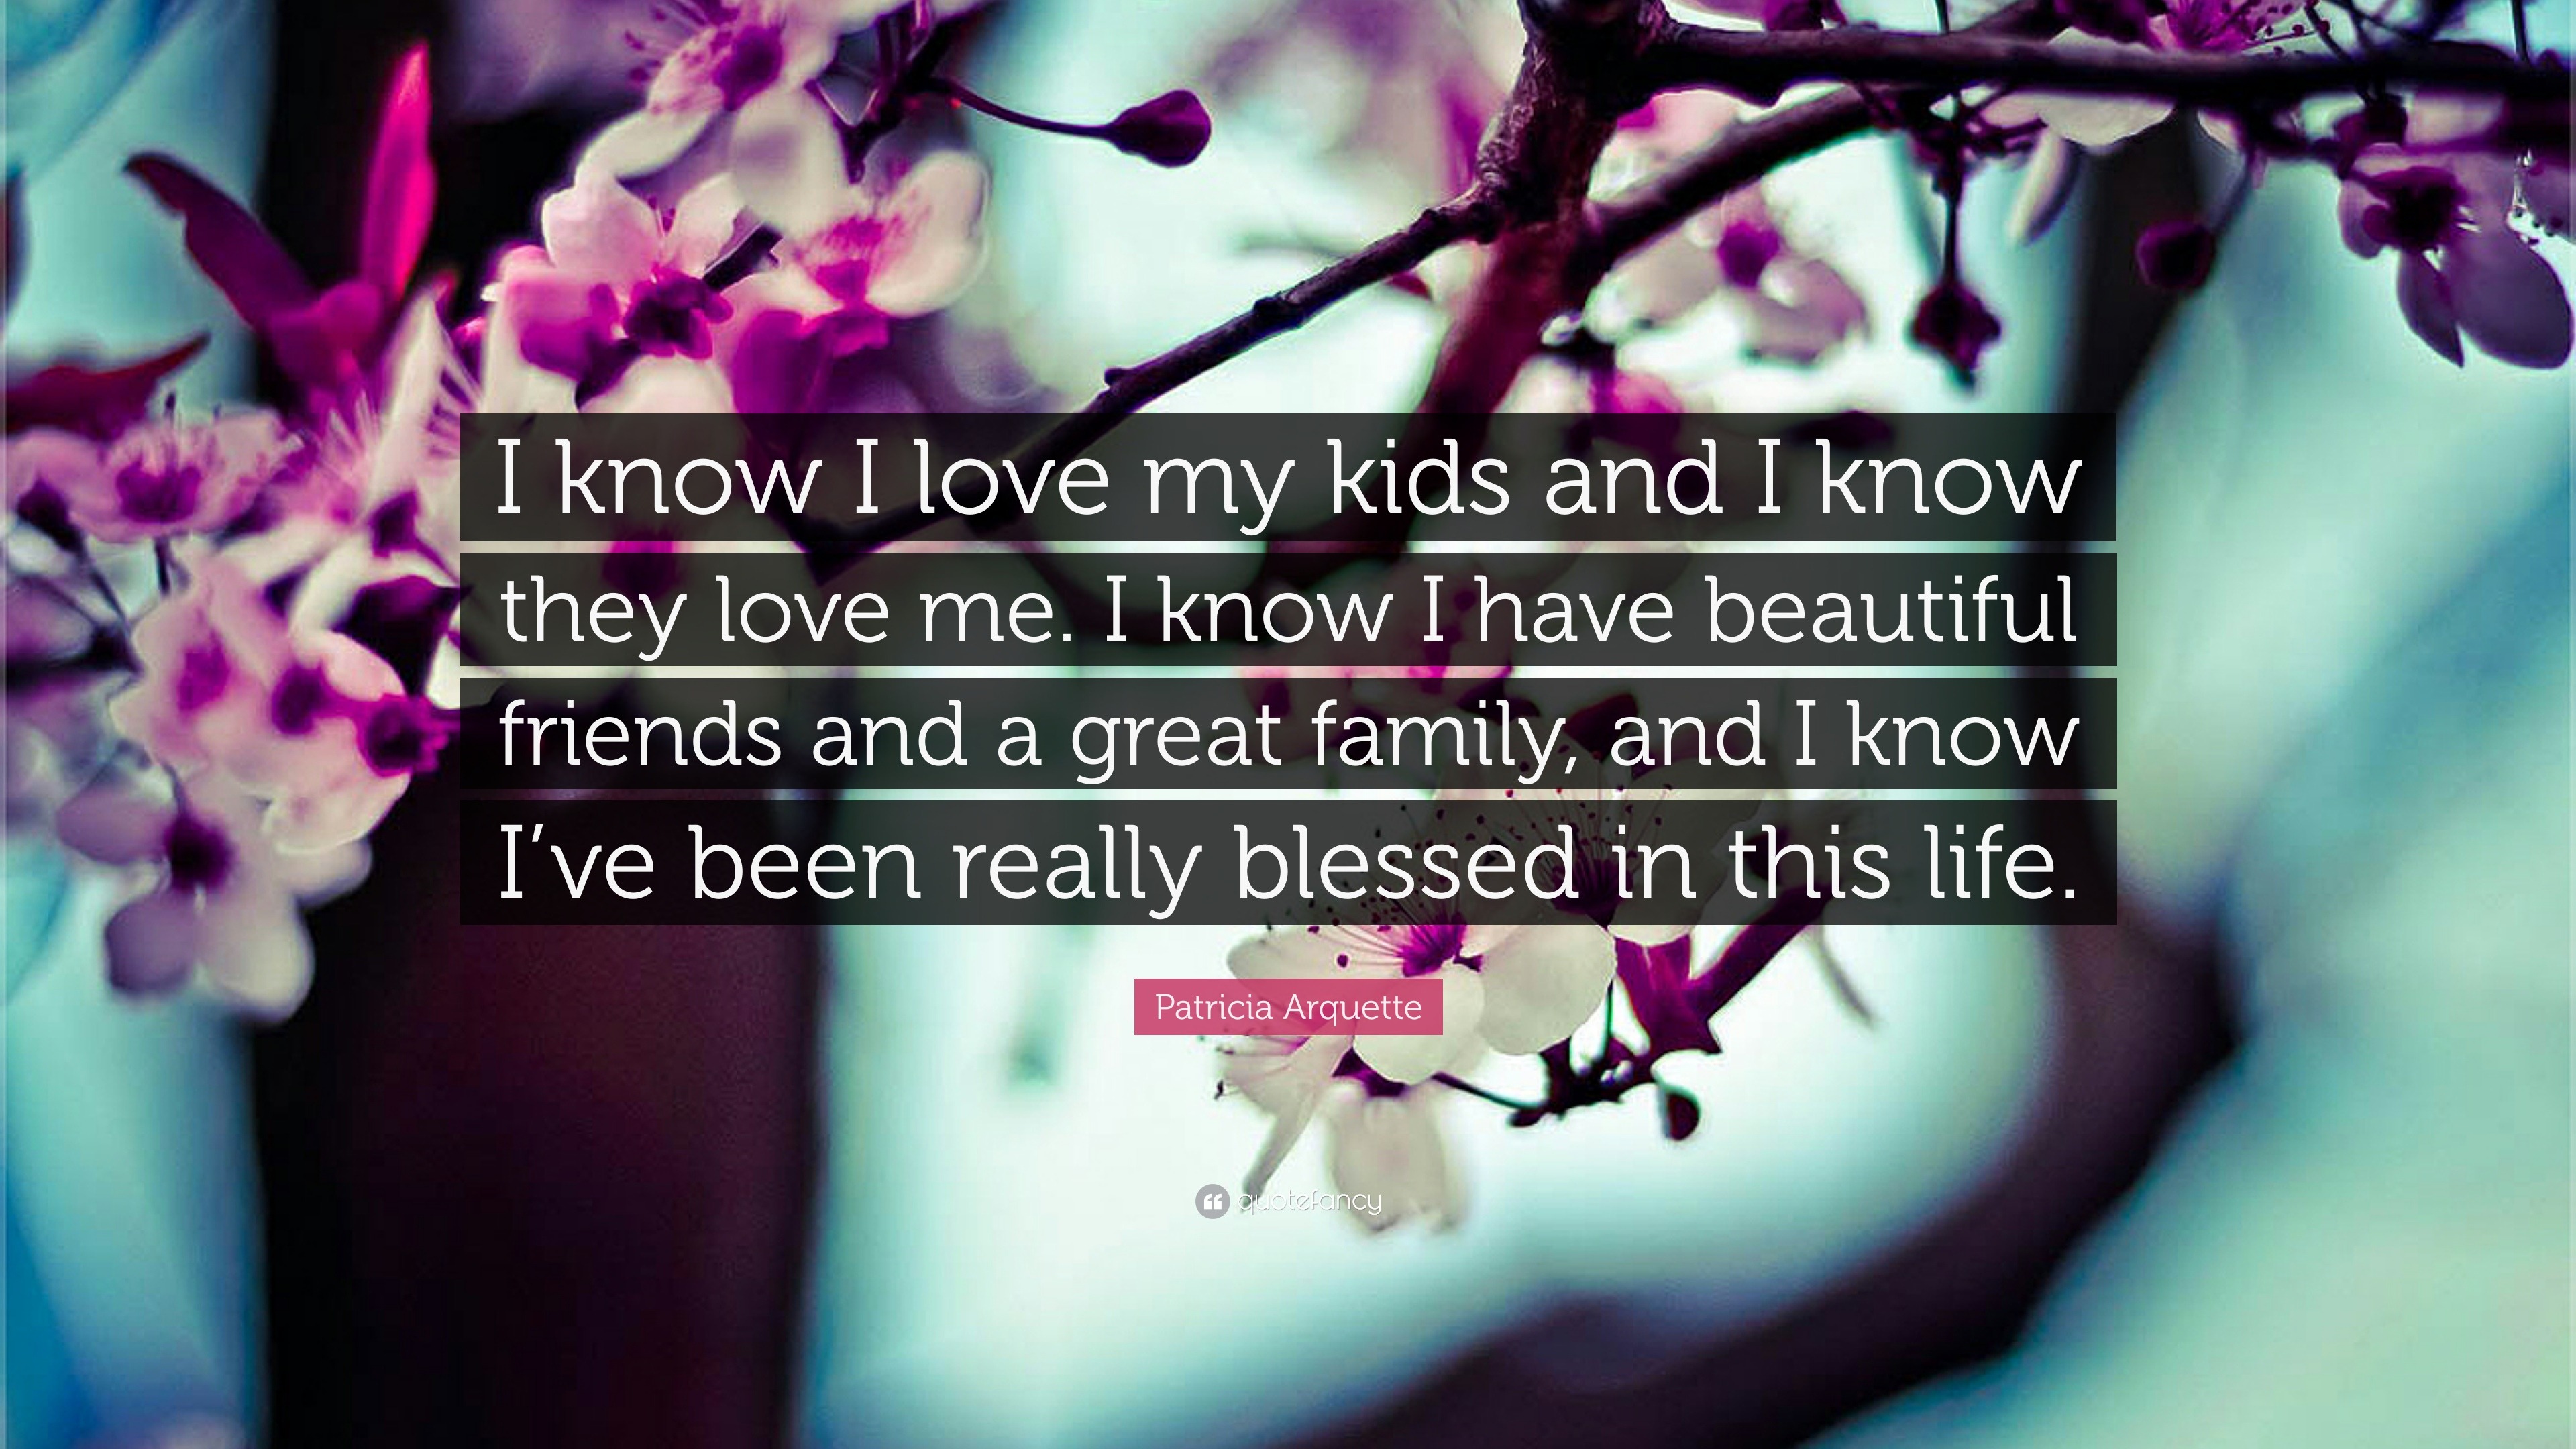 Patricia Arquette Quote “I know I love my kids and I know they love